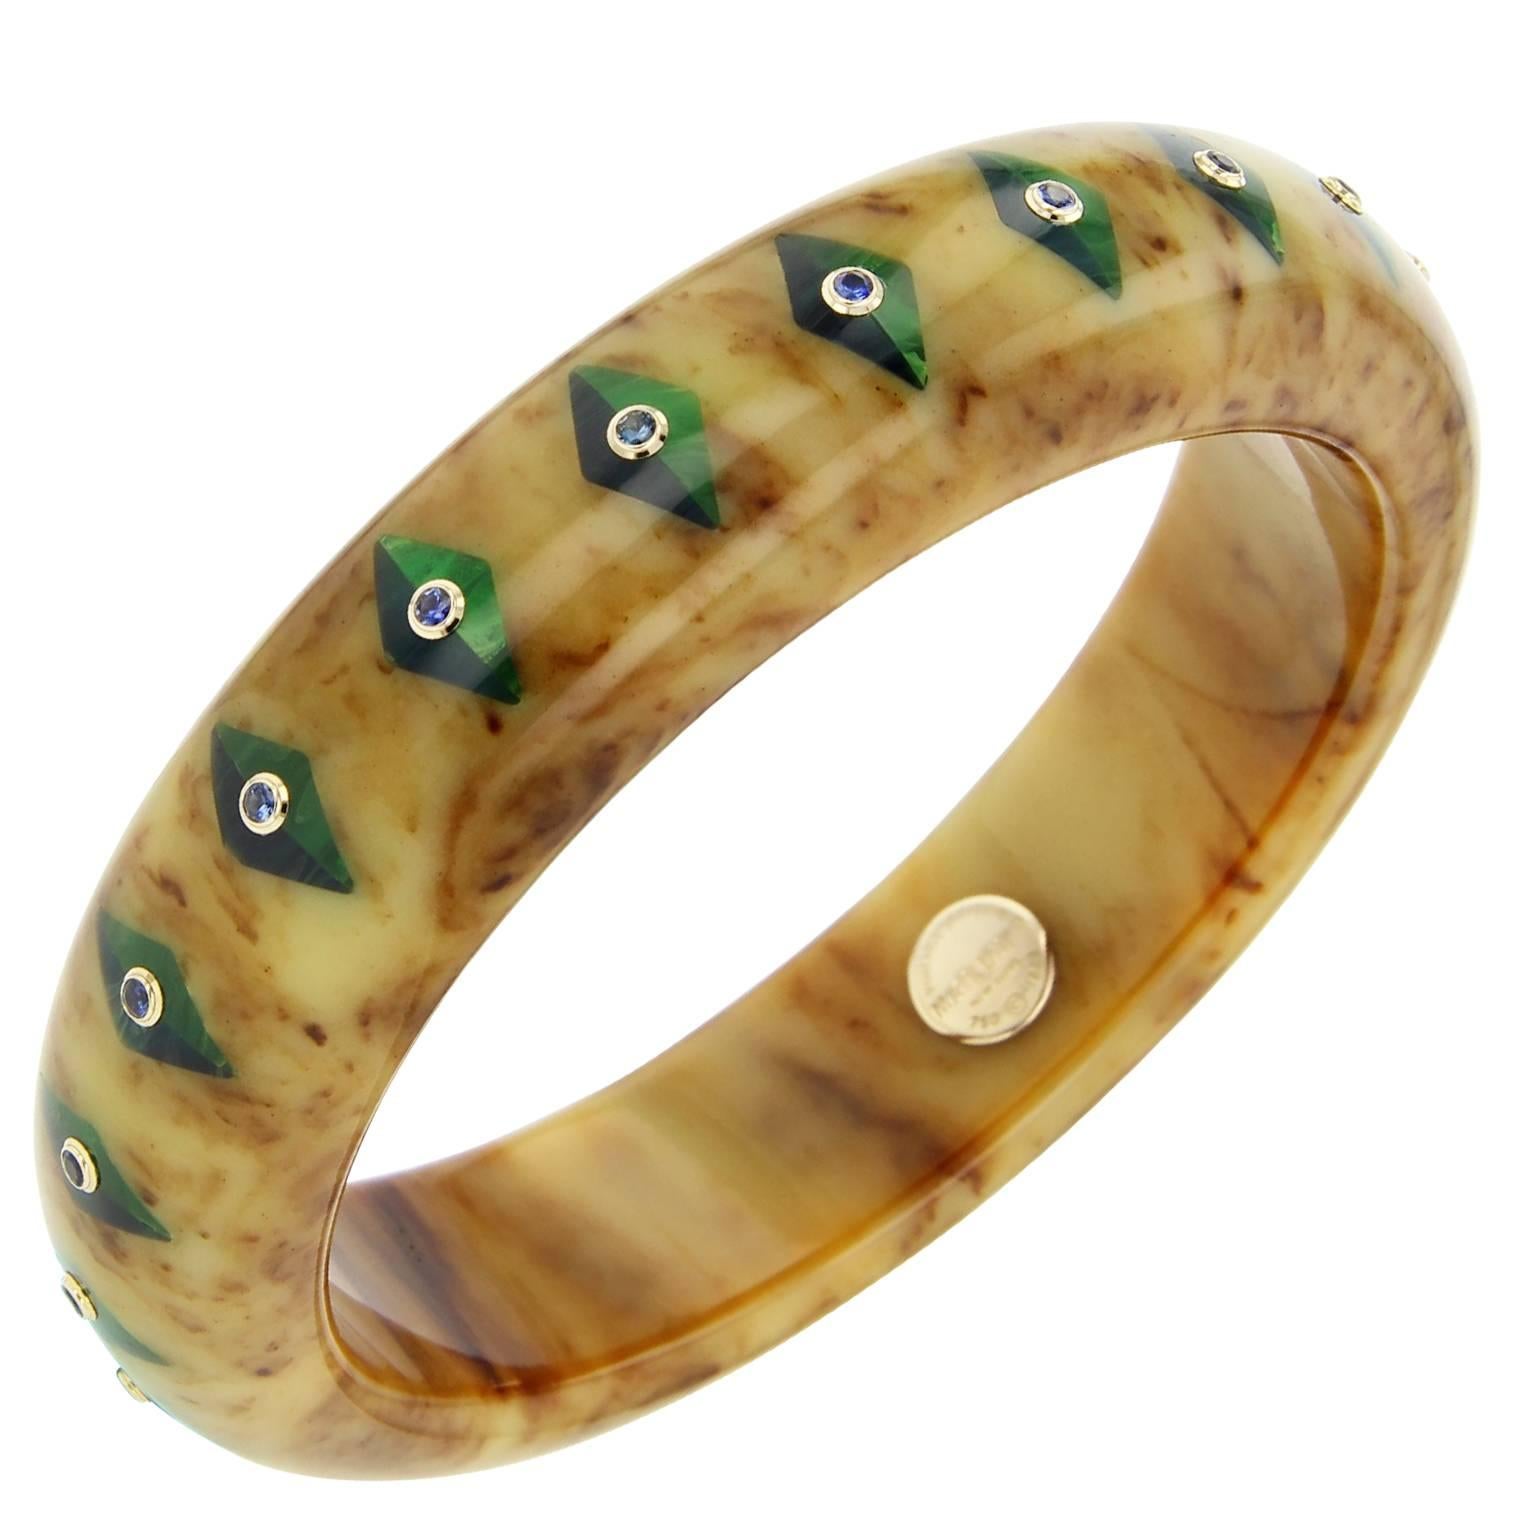 This chic Mark Davis bangle is handcrafted using marbled brown vintage bakelite. Precisely inlaid with a diamond-shaped motif of half blue and half green lozenges and studded with fine blue sapphires, bezel-set in 18k yellow gold.

Full details